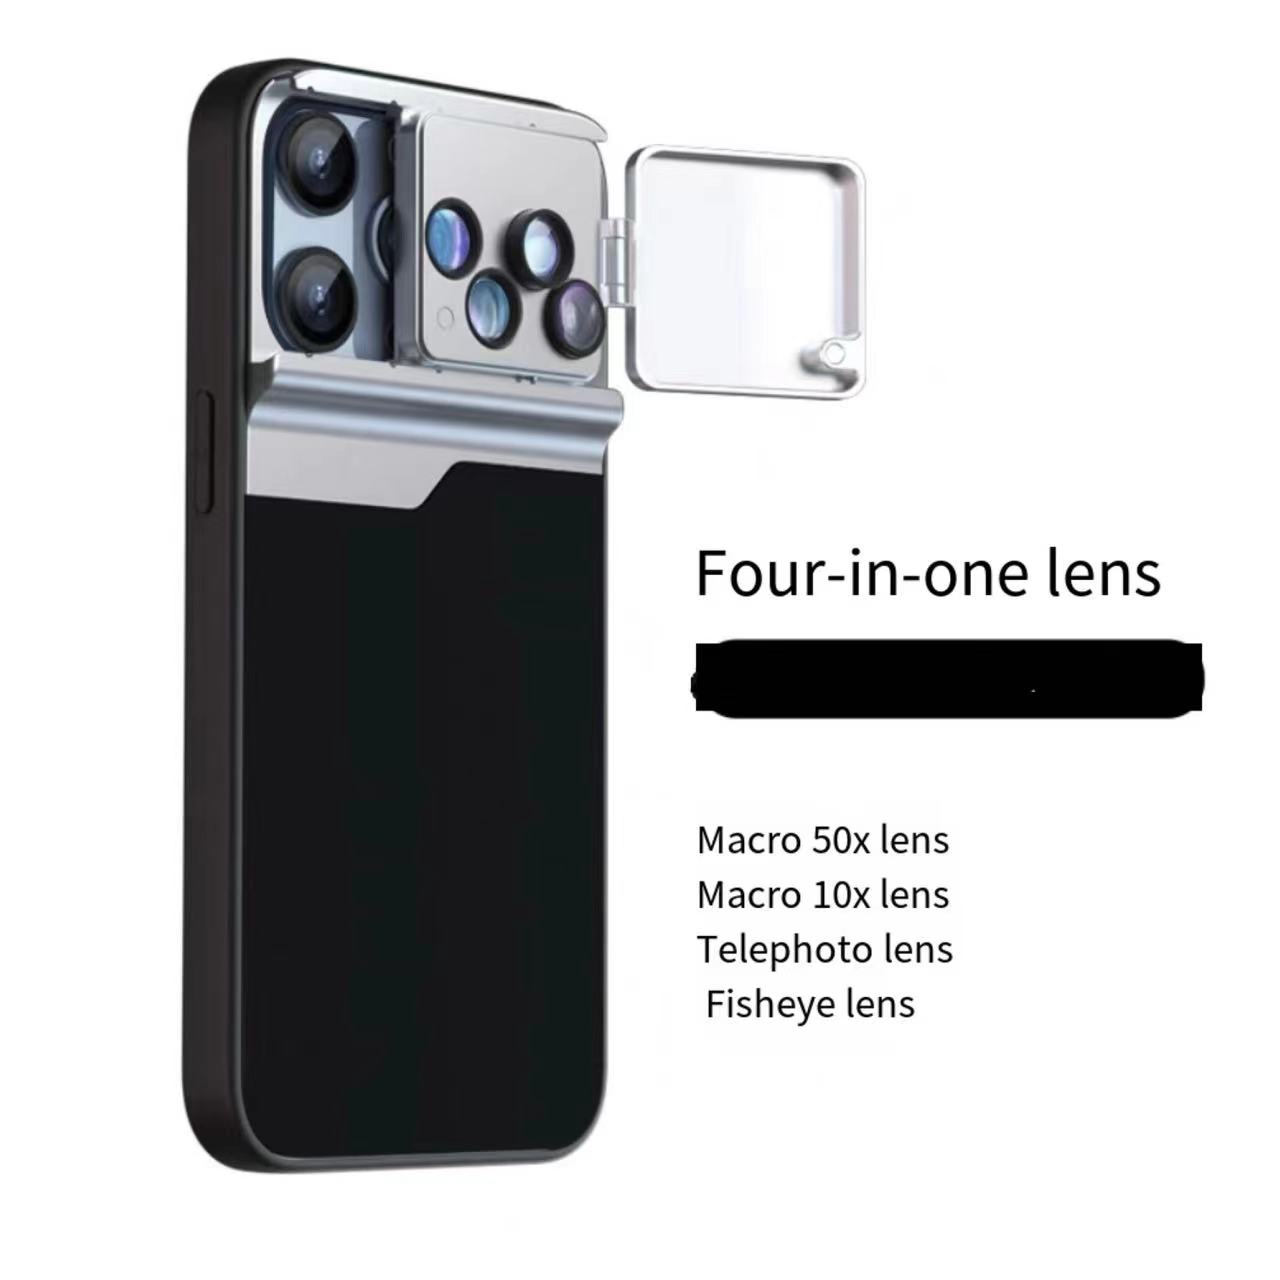 iPhone Five-in-One Lens Phone Case with Telephoto and Macro External Fish Eye Macro Lens